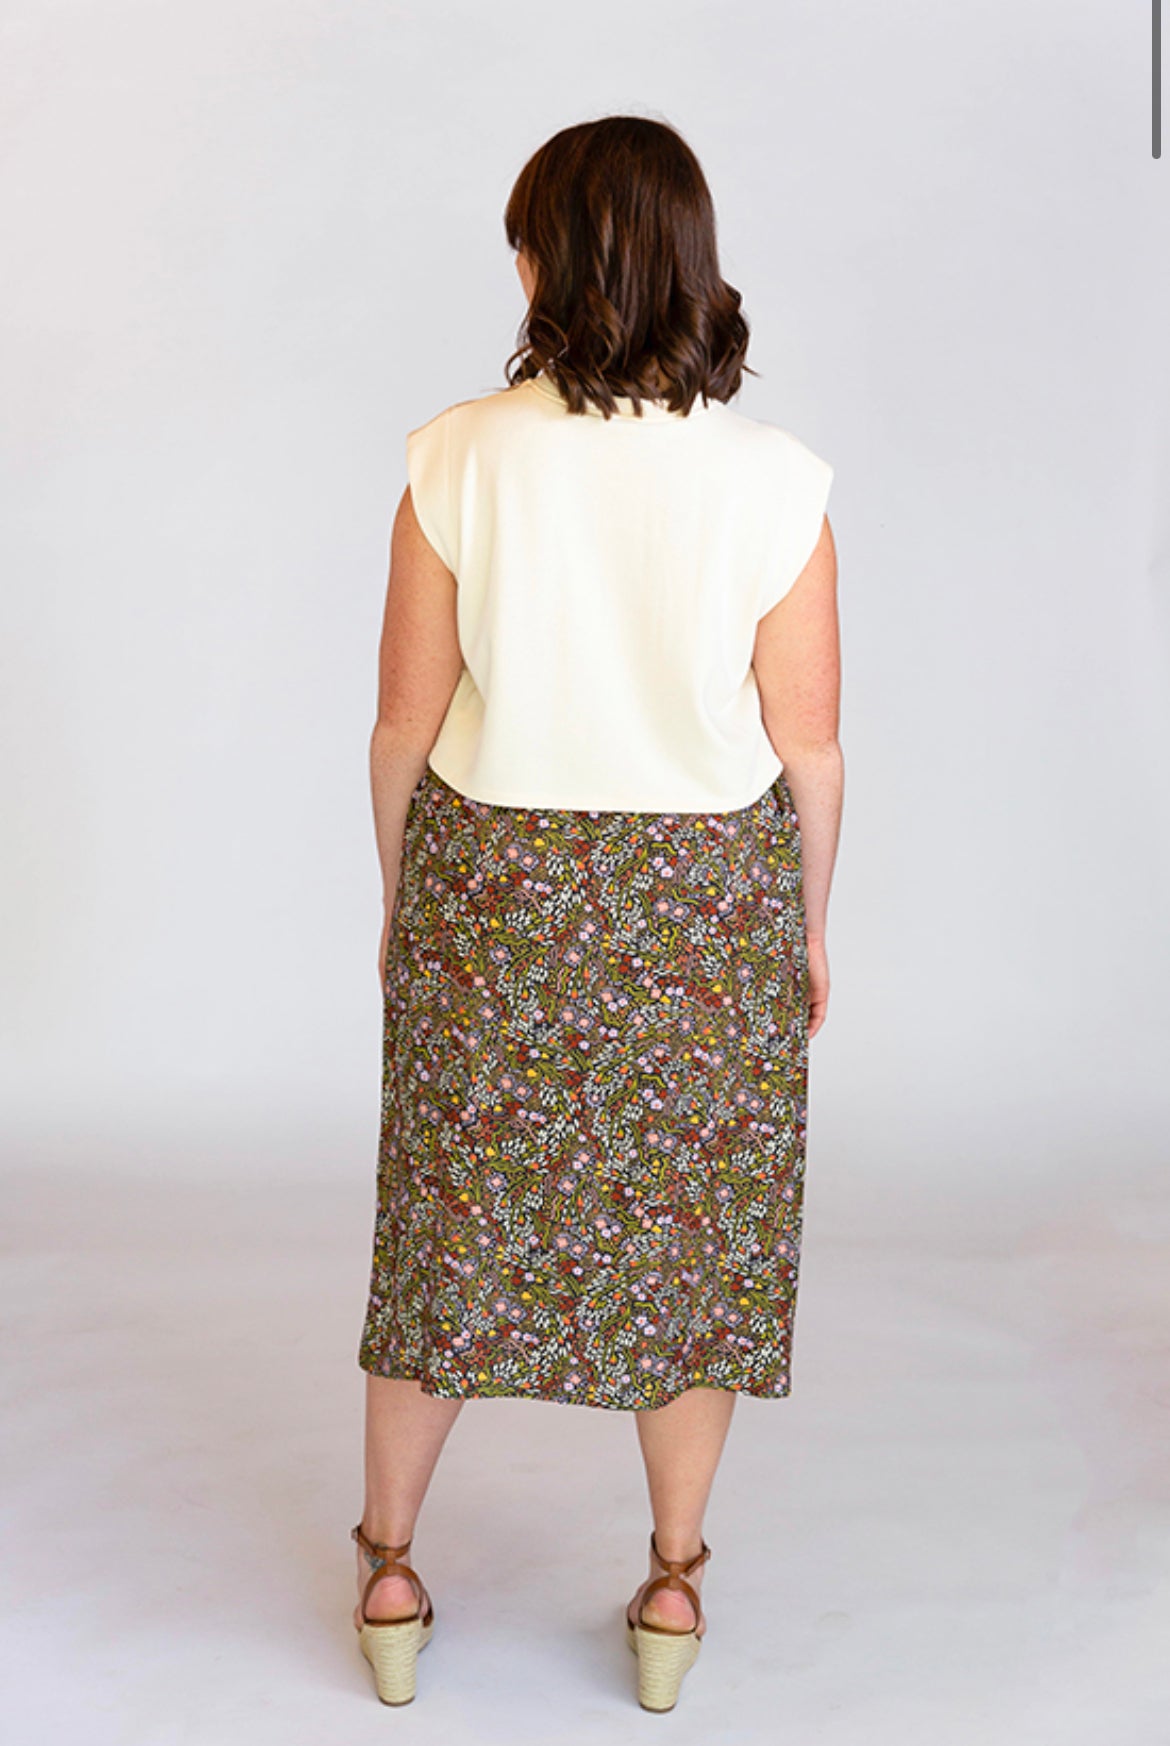 Chalk and Notch - Evelyn Skirt Sewing Pattern